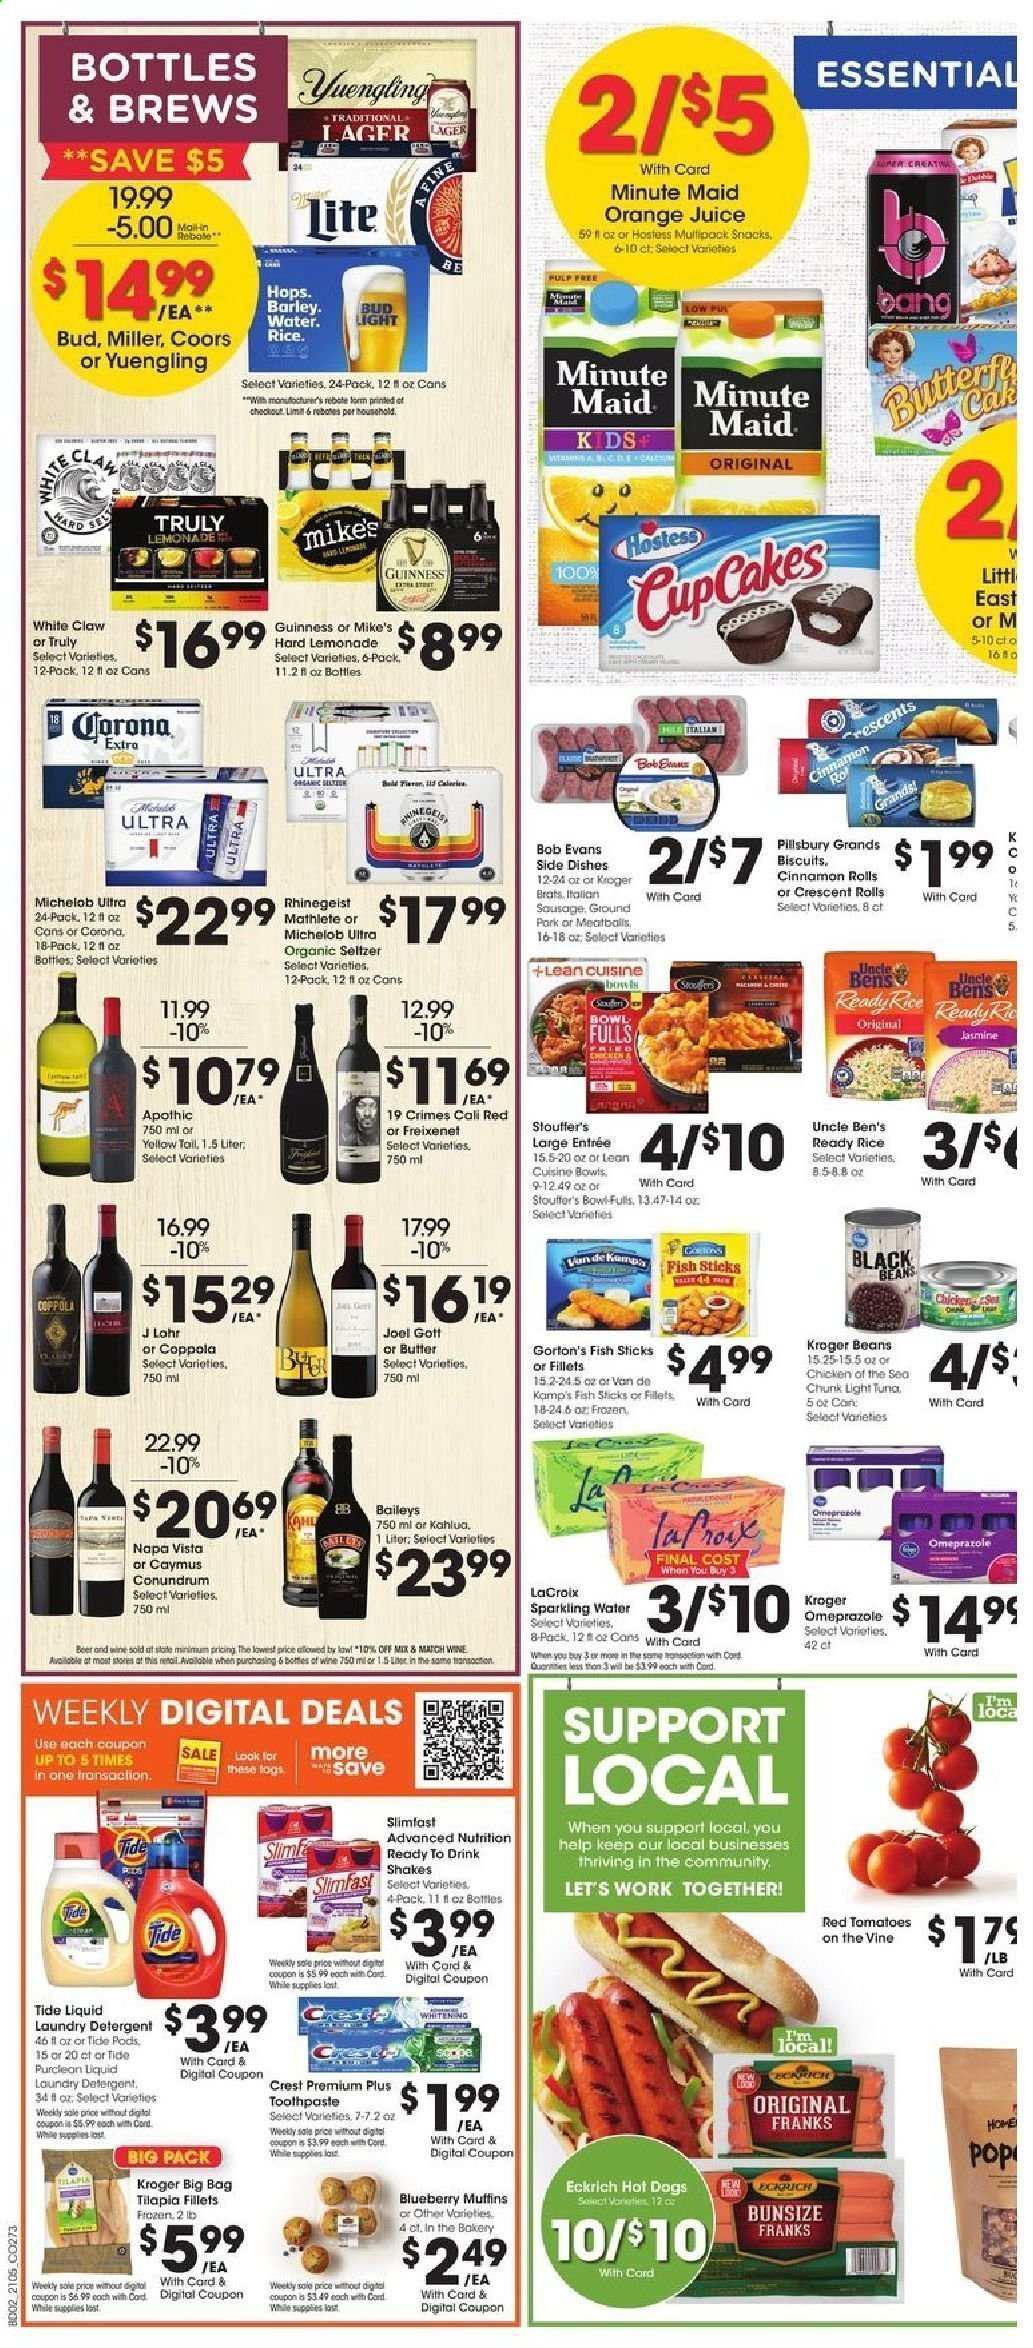 thumbnail - Kroger Flyer - 03/03/2021 - 03/09/2021 - Sales products - cinnamon roll, crescent rolls, cake, muffin, tilapia, fish, Van de Kamp's, Gorton's, hot dog, meatballs, Pillsbury, Lean Cuisine, Slimfast, fish sticks, Bob Evans, sausage, shake, butter, beans, biscuit, snack, light tuna, Uncle Ben's, Chicken of the Sea, black beans, lemonade, orange juice, juice, seltzer water, sparkling water, wine, Kahlúa, Baileys, White Claw, TRULY, beer, Coors, Yuengling, Michelob, Bud Light, Corona Extra, Guinness, Miller, Lager, Rhinegeist, ground pork, detergent, Tide, laundry detergent, toothpaste, Crest, lid, bag. Page 4.